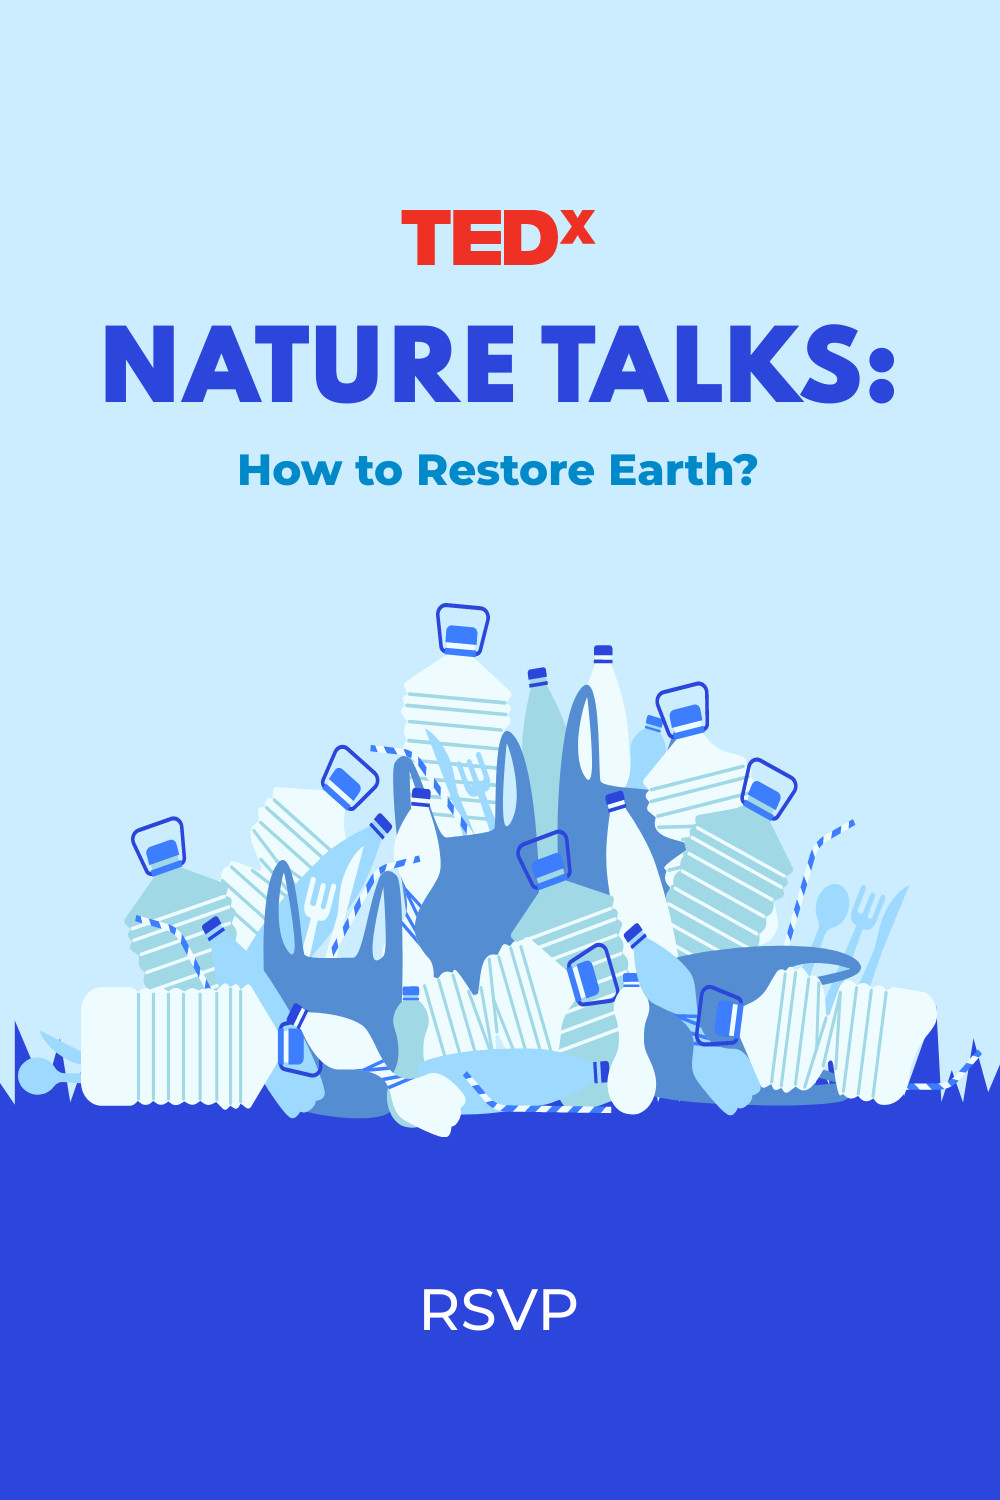 How to Restore Earth Talk Event Facebook Cover 820x360